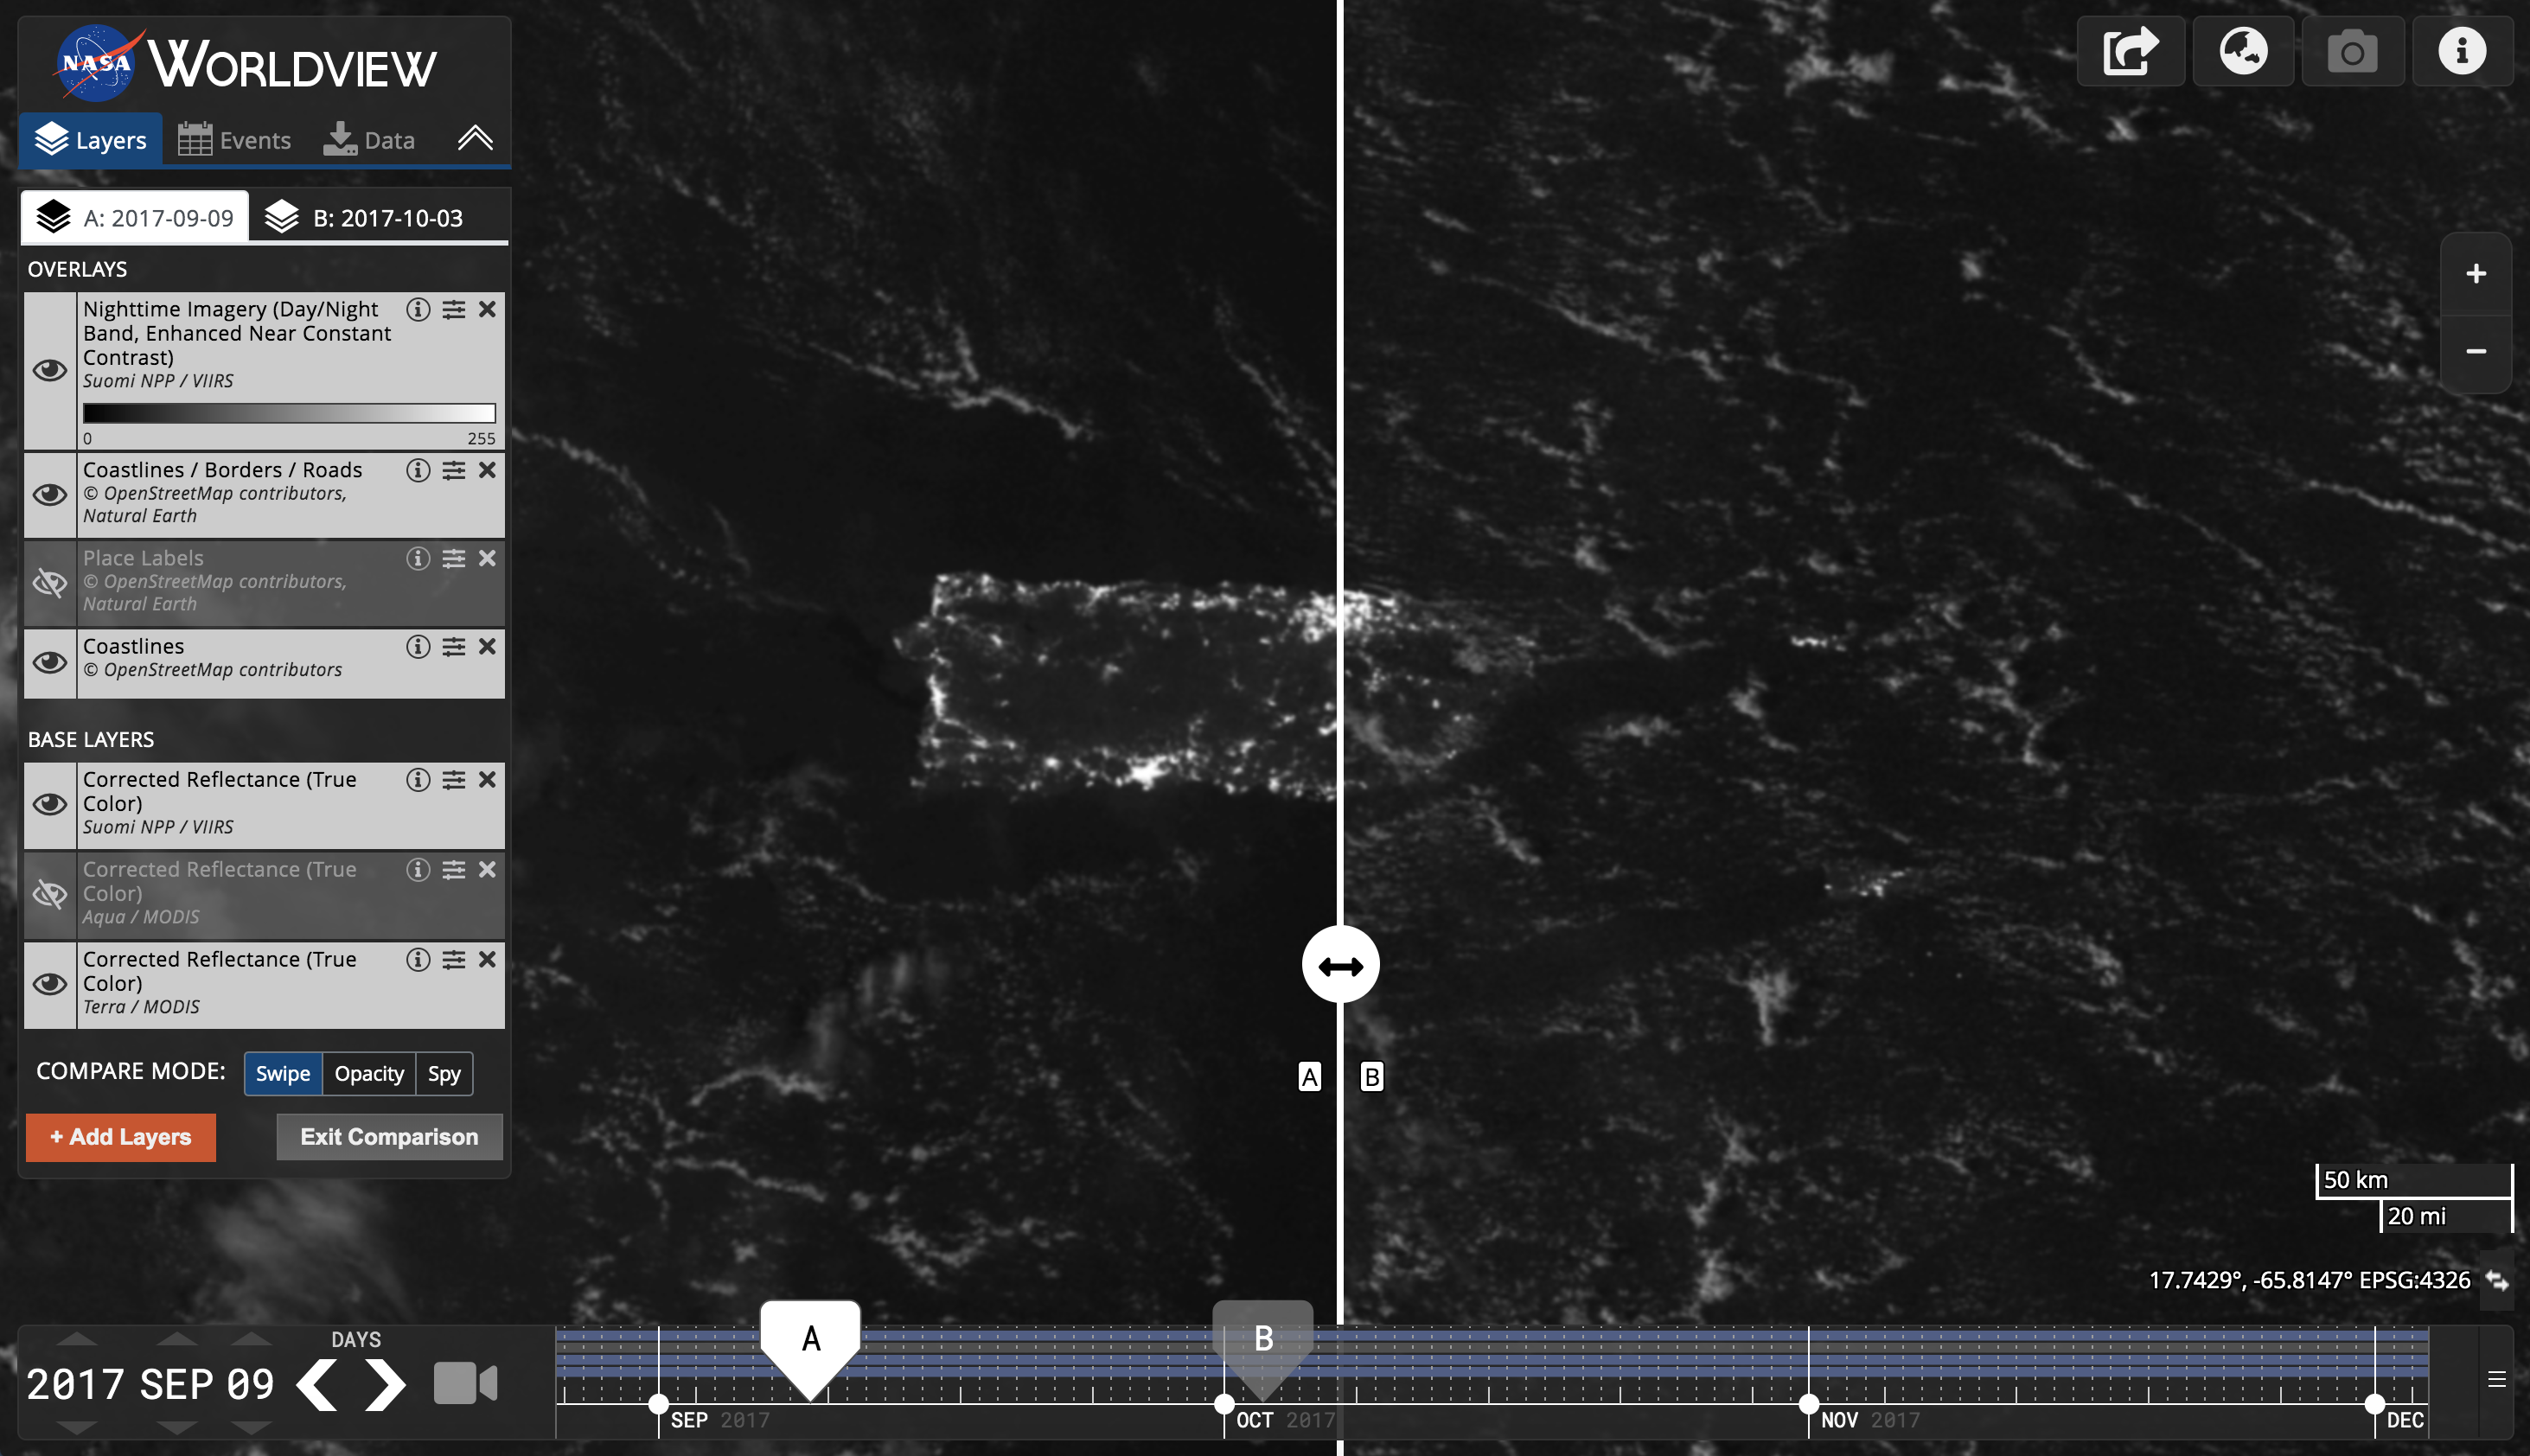 Hurricane Maria was a category 5 storm that devastated numerous places, most notably Puerto Rico, in September 2017. In the Woldview comparison, selecting a date pre-storm and then one post-storm shows the nighttime lights over the island, and how the storm affected electricity, even months after.